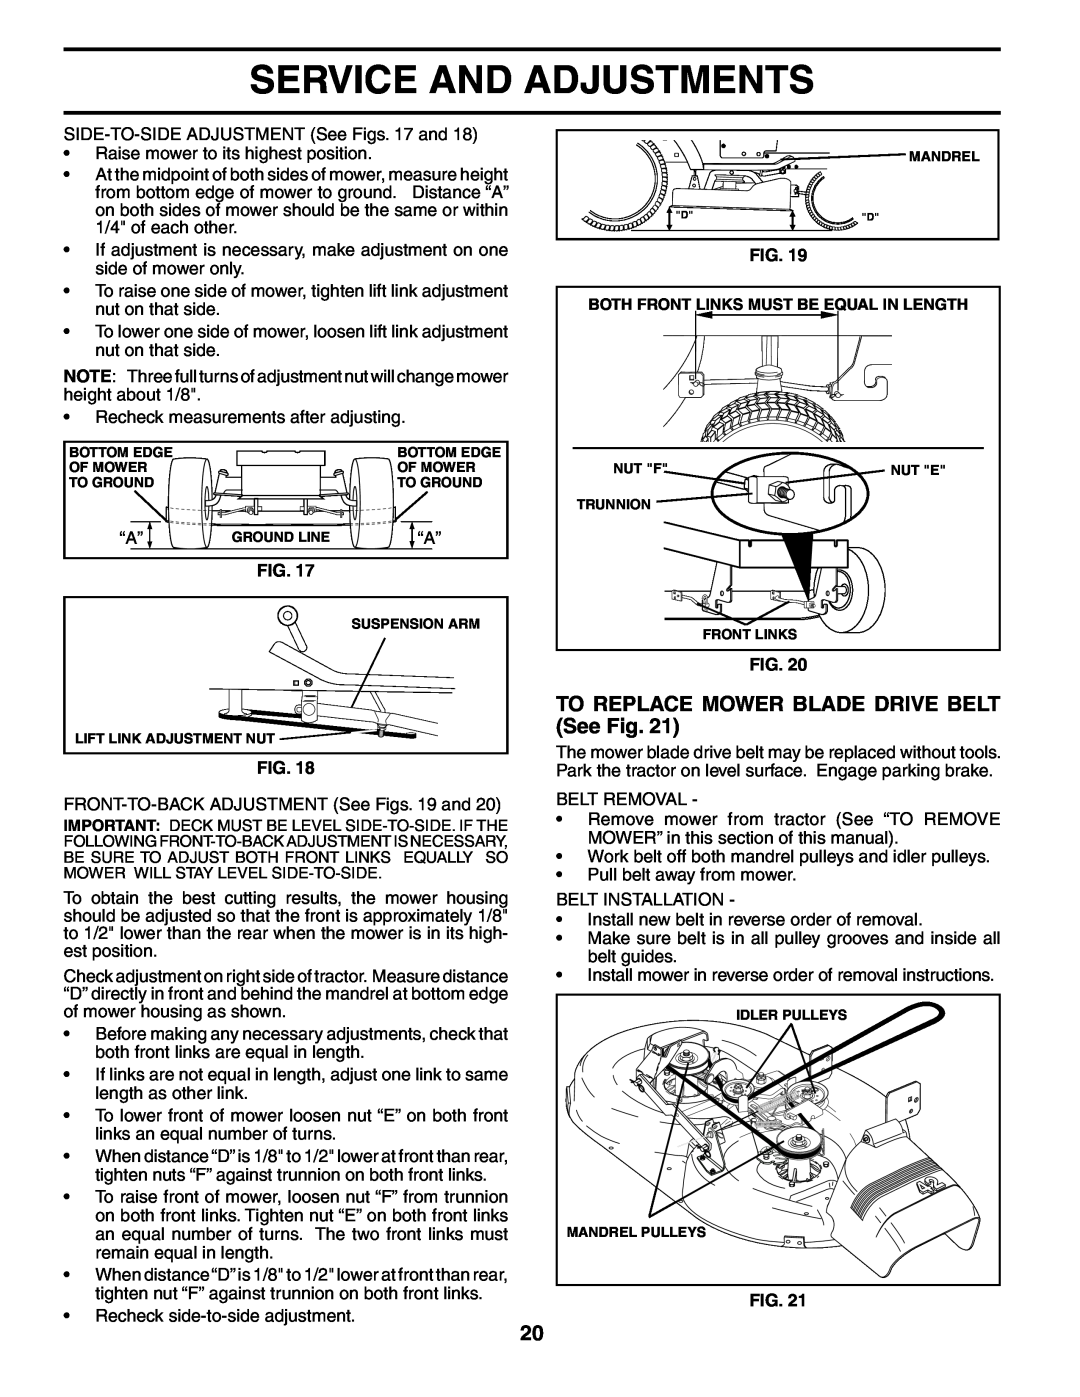 Poulan 187301 manual TO REPLACE MOWER BLADE DRIVE BELT See Fig, Service And Adjustments 